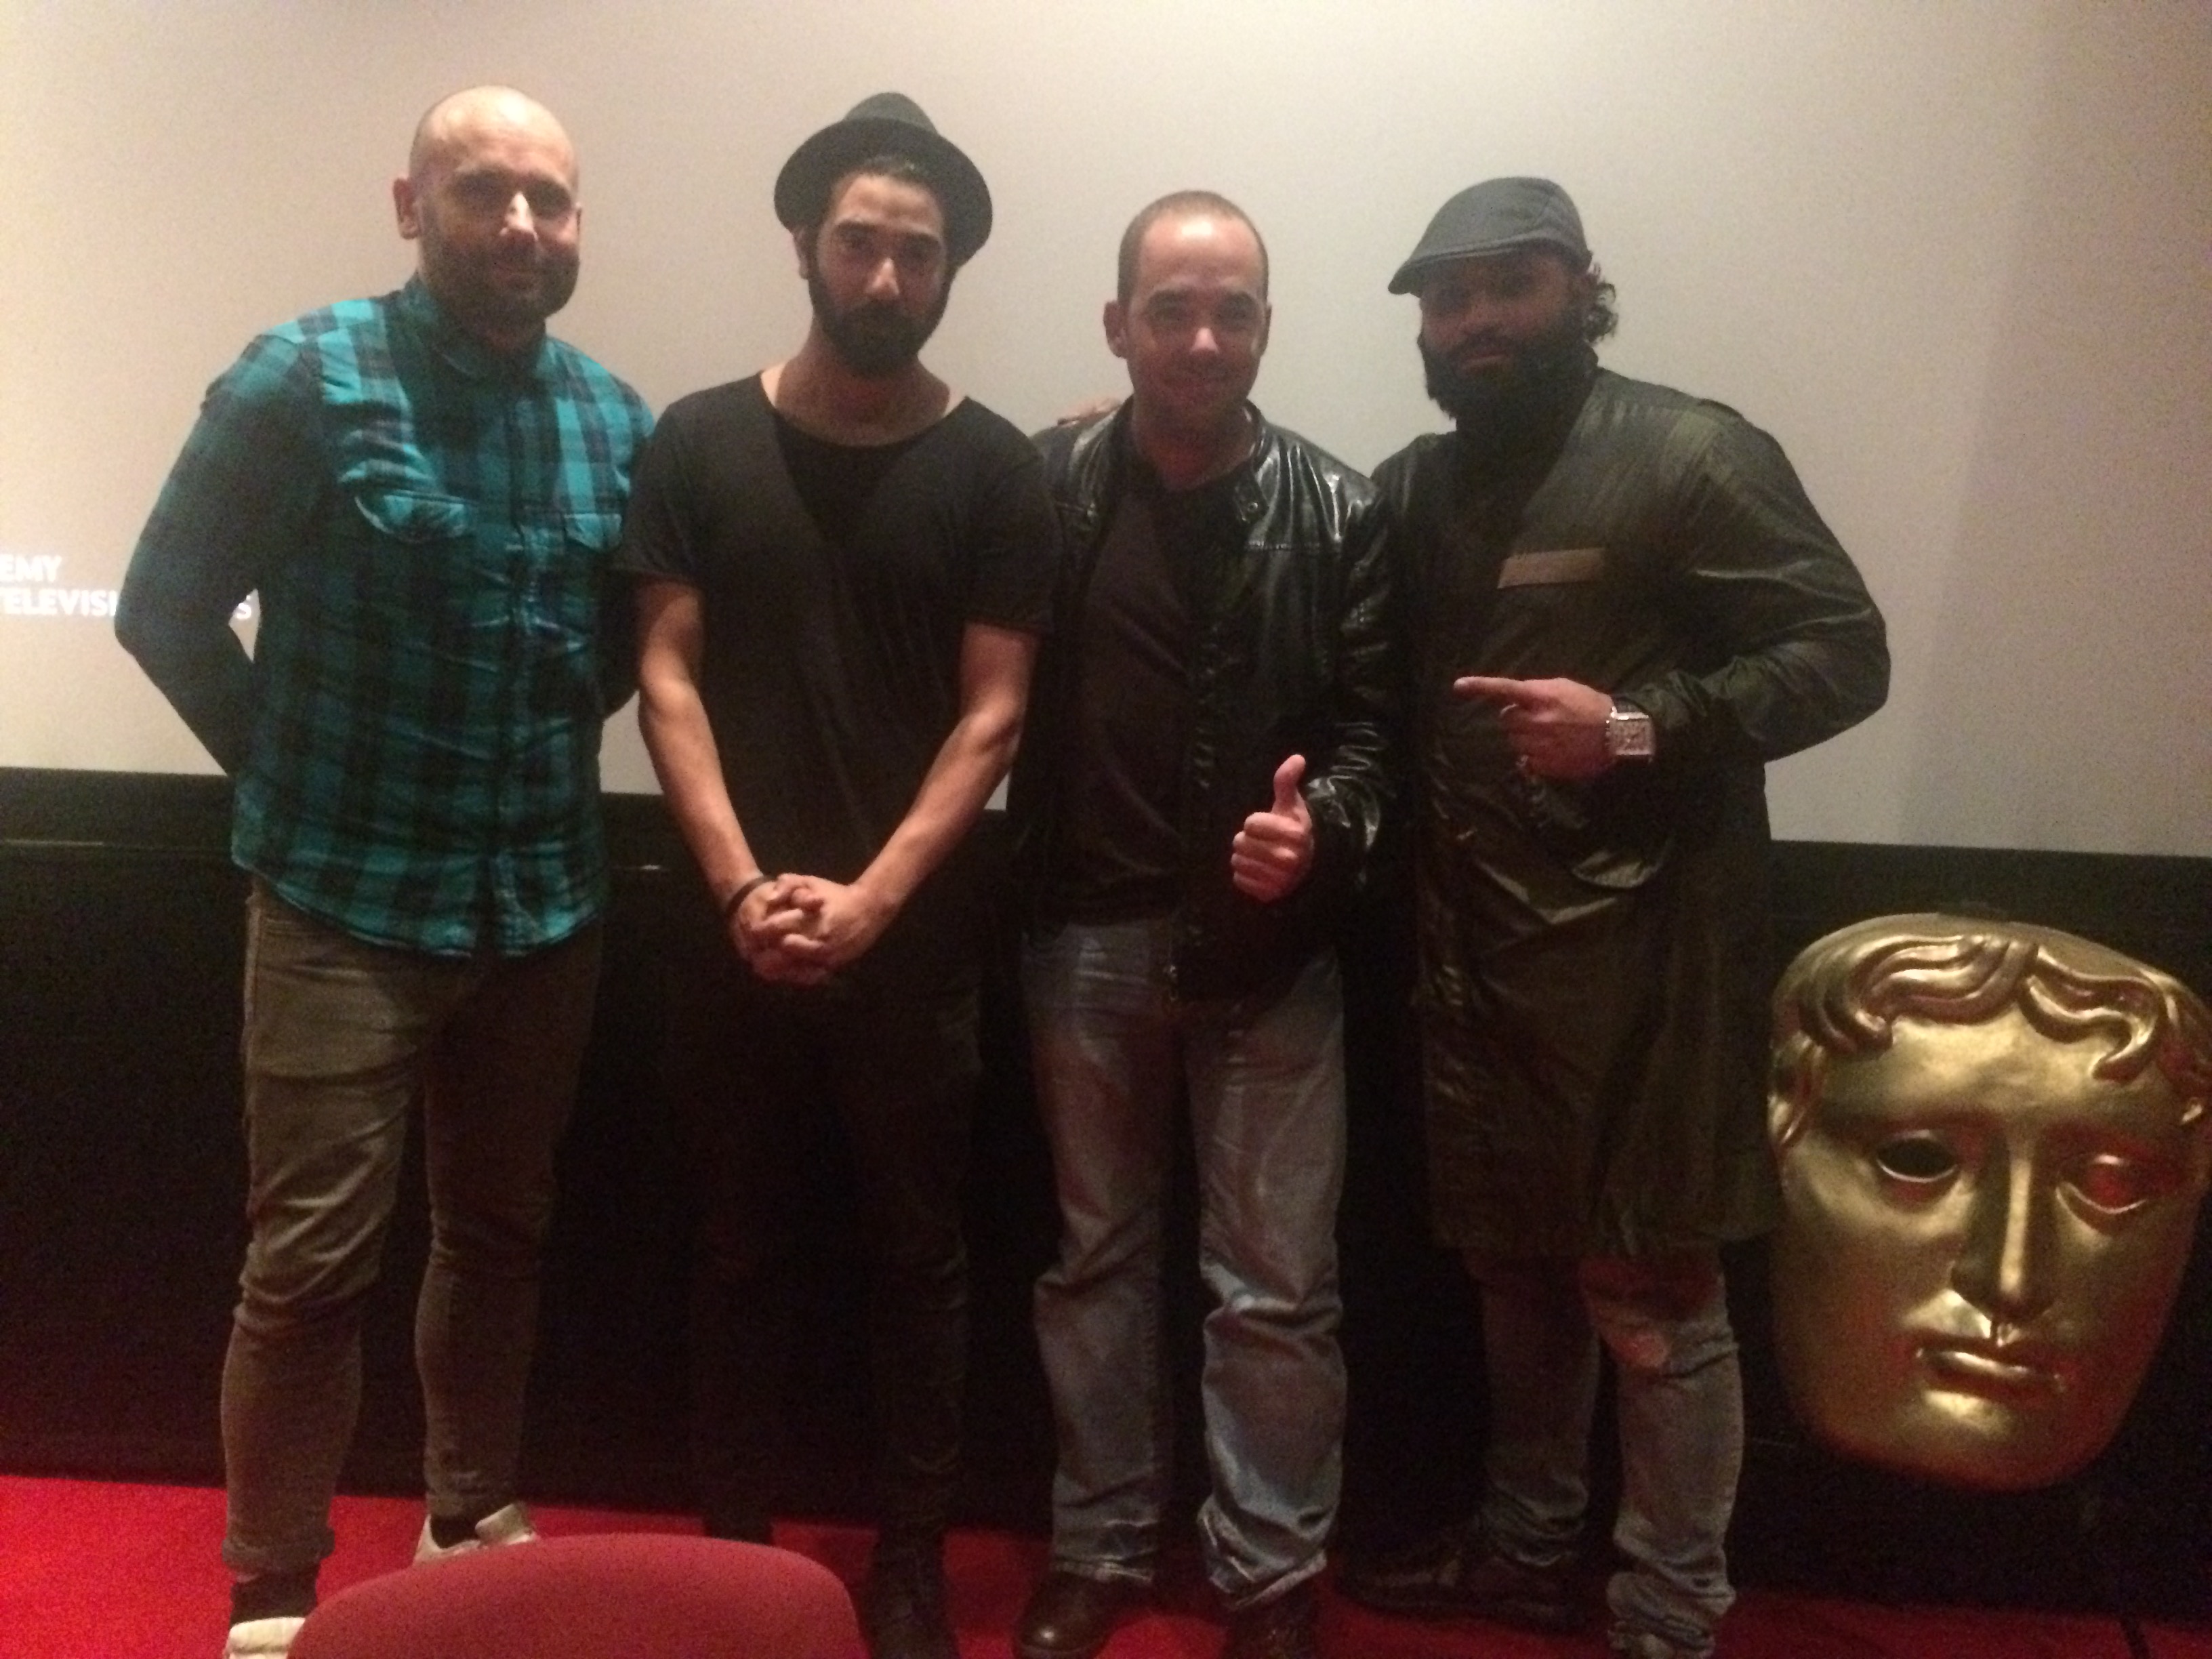 (From left to right) Director Keri Collins,Ray Panthaki,Rhys Horler and Thaer Al-Shayei at the premiere of 